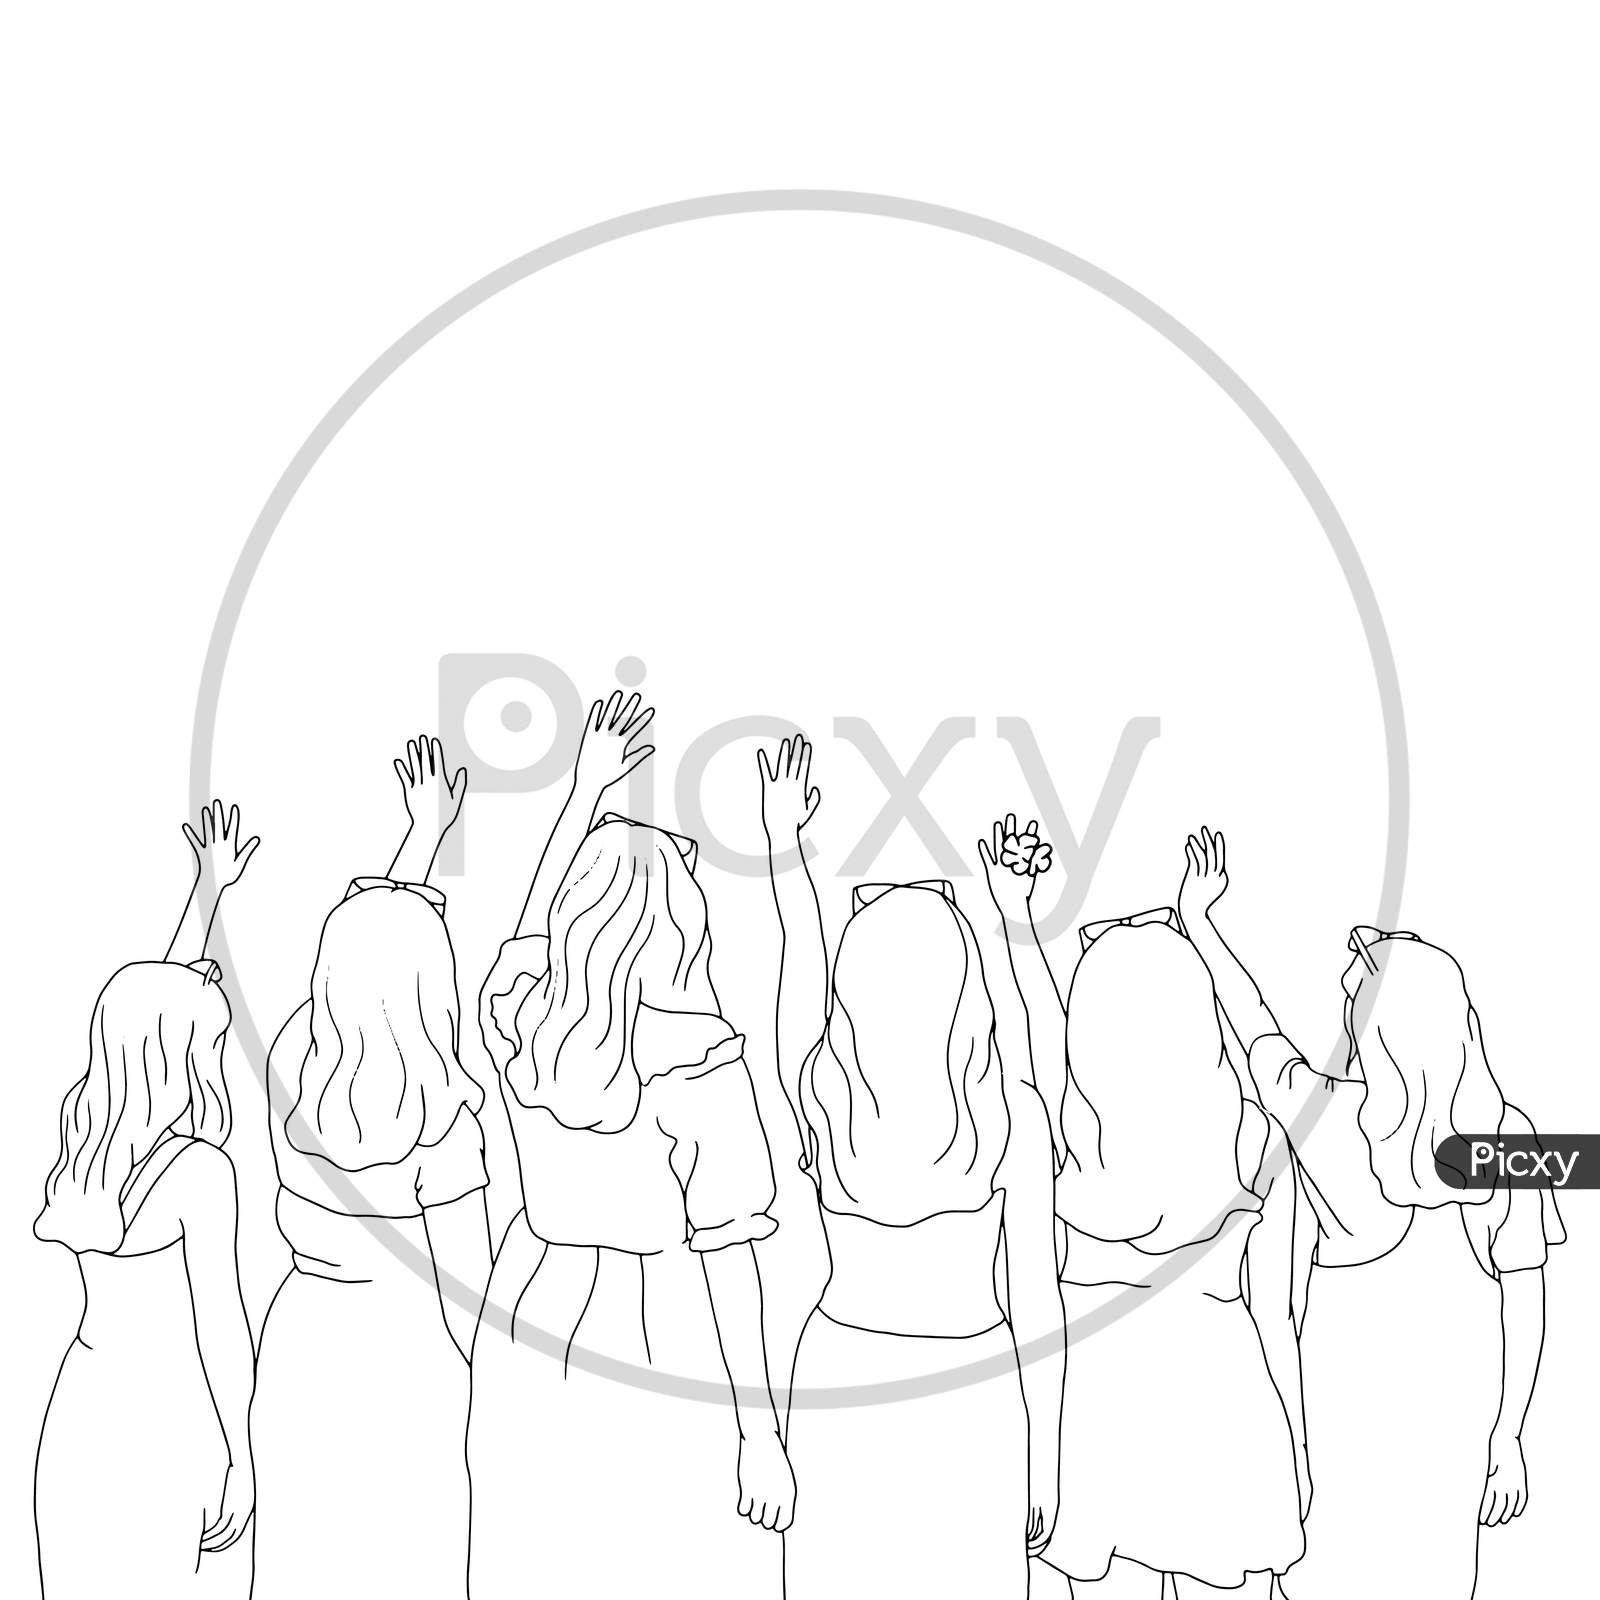 Coloring Pages - A Group Of Girls Waving Their Hands In The Air, Friends Time, Flat Colorful Illustration Of People For Friendship Day. Hand-Drawn Character Illustration Of Happy People.